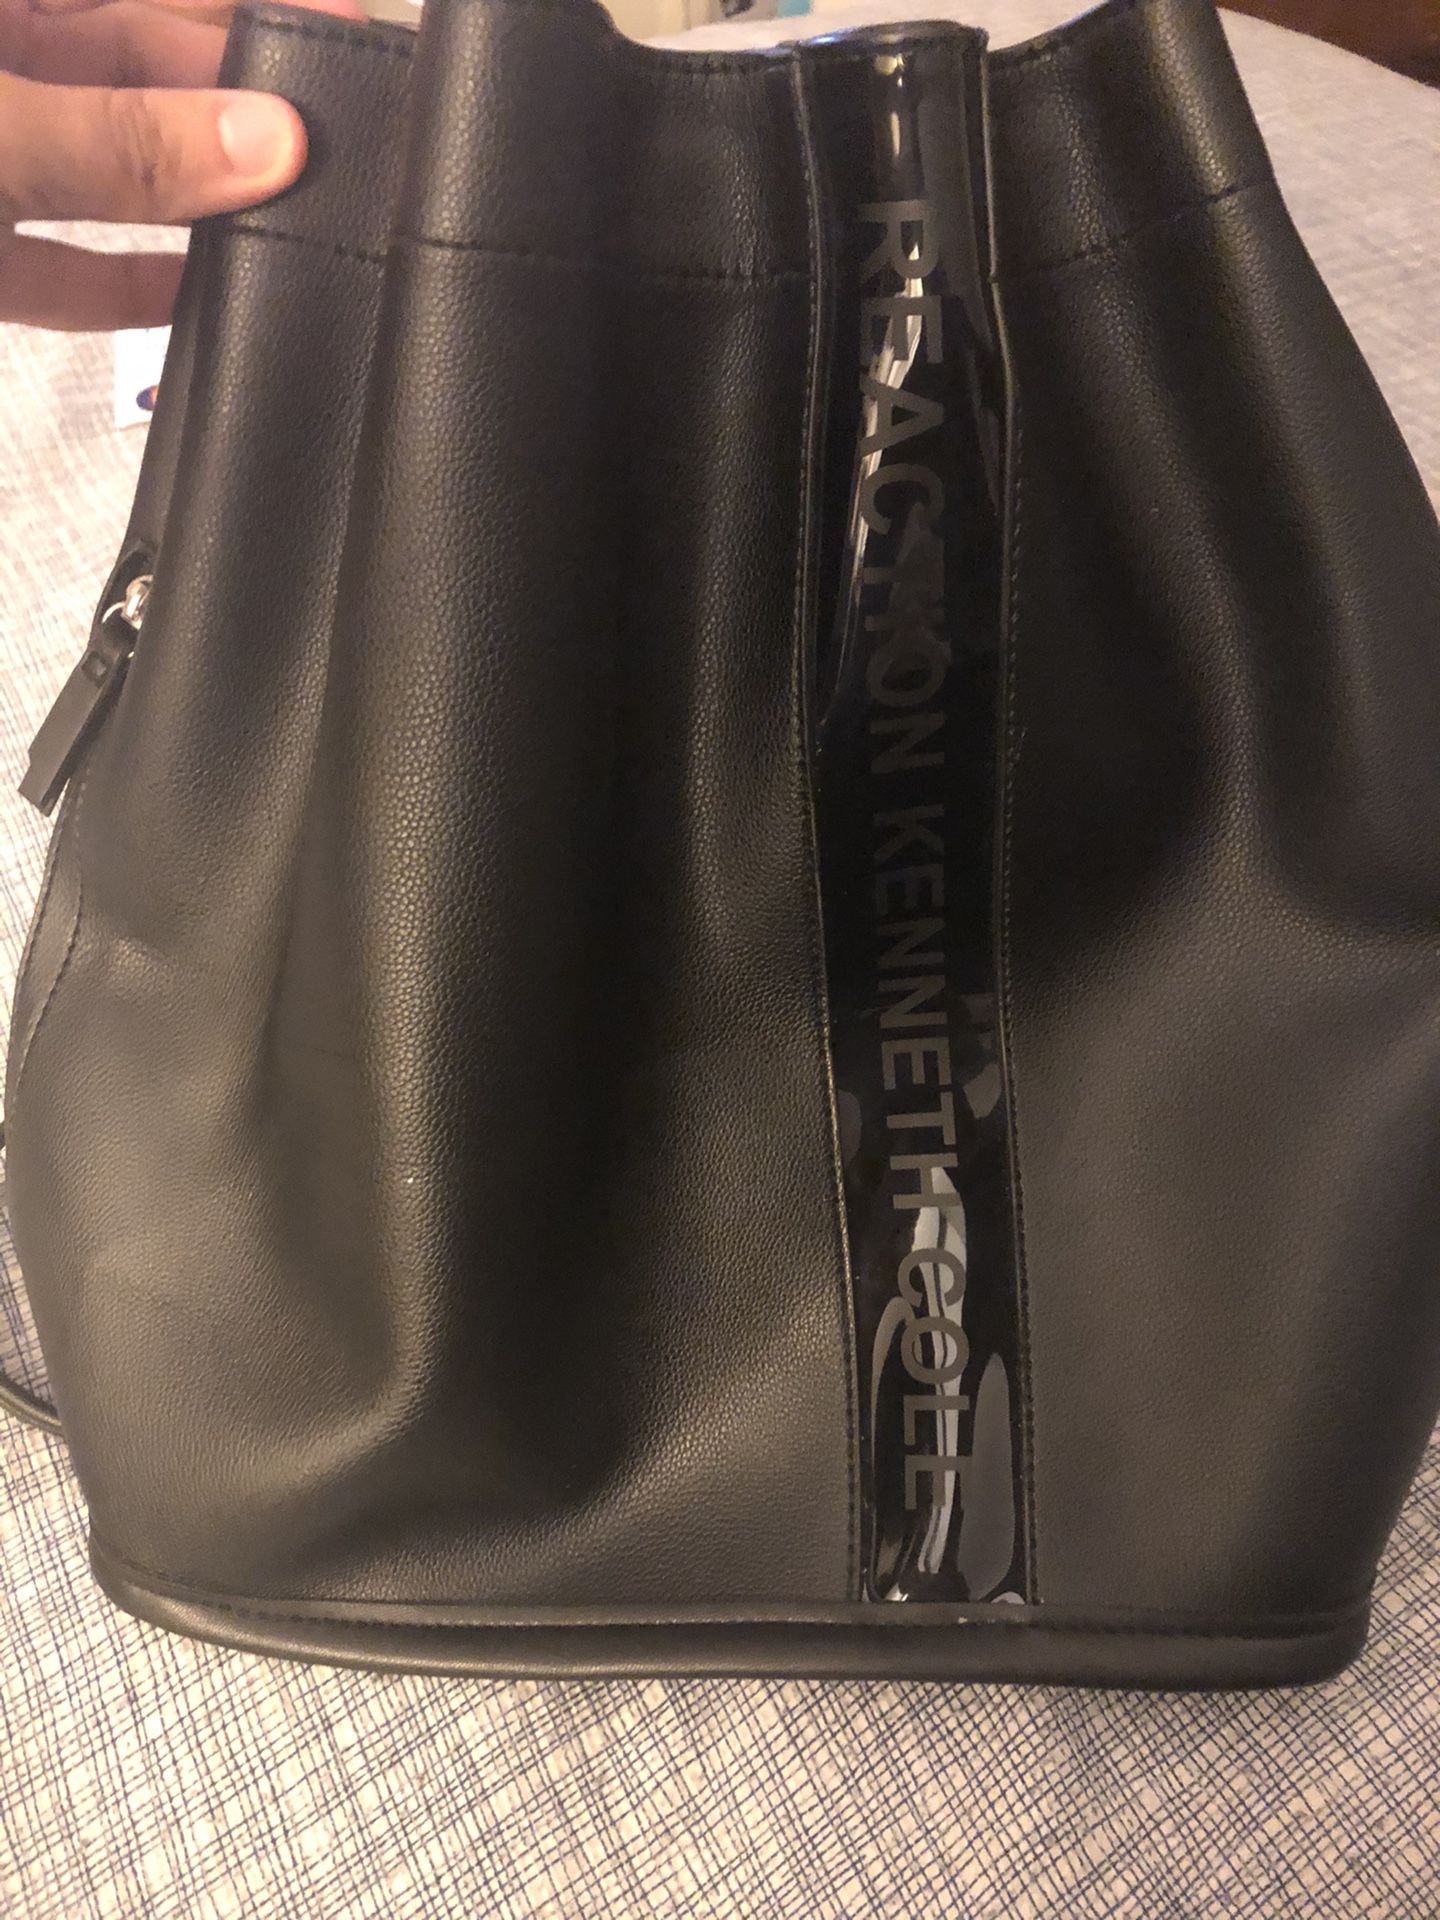 Kenneth Cole Reaction Drawstring Back Pack Purse